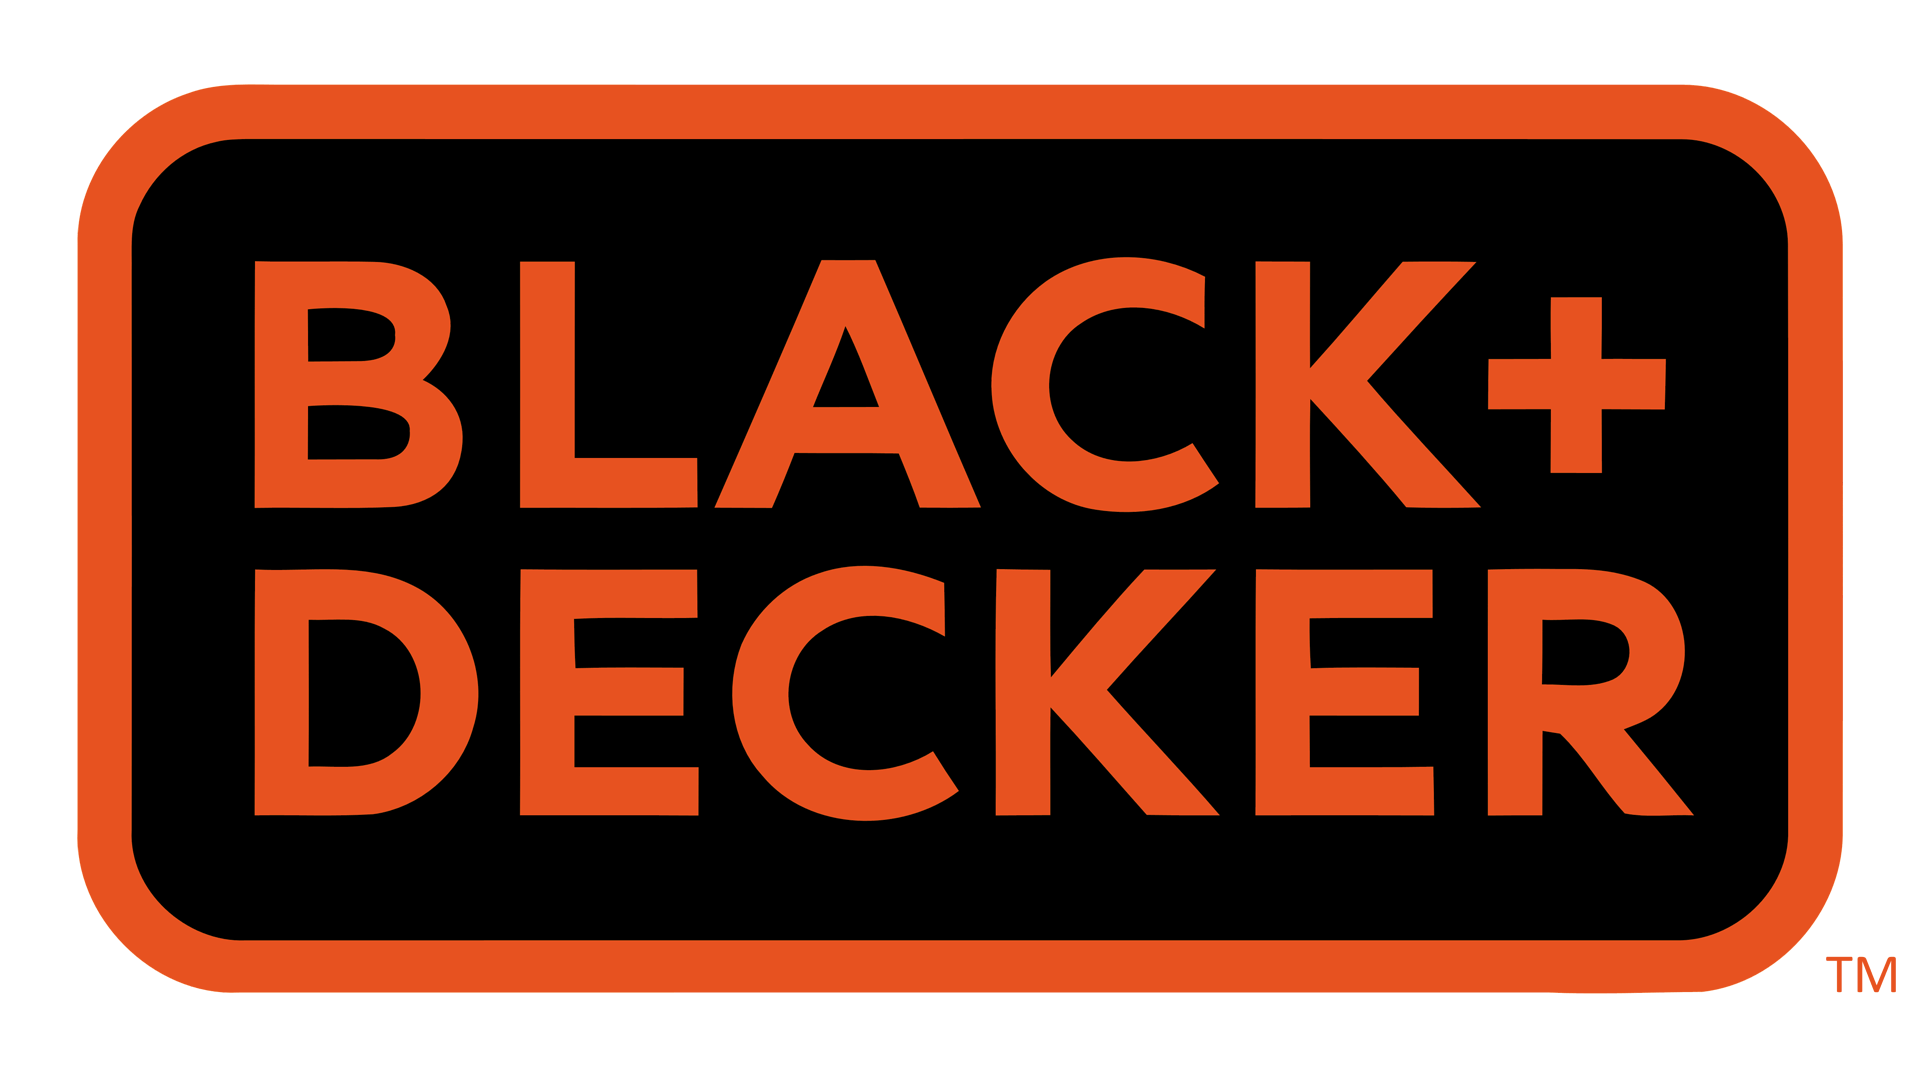 Black and Decker Logo - Black & Decker Logo, Black & Decker Symbol, Meaning, History and ...